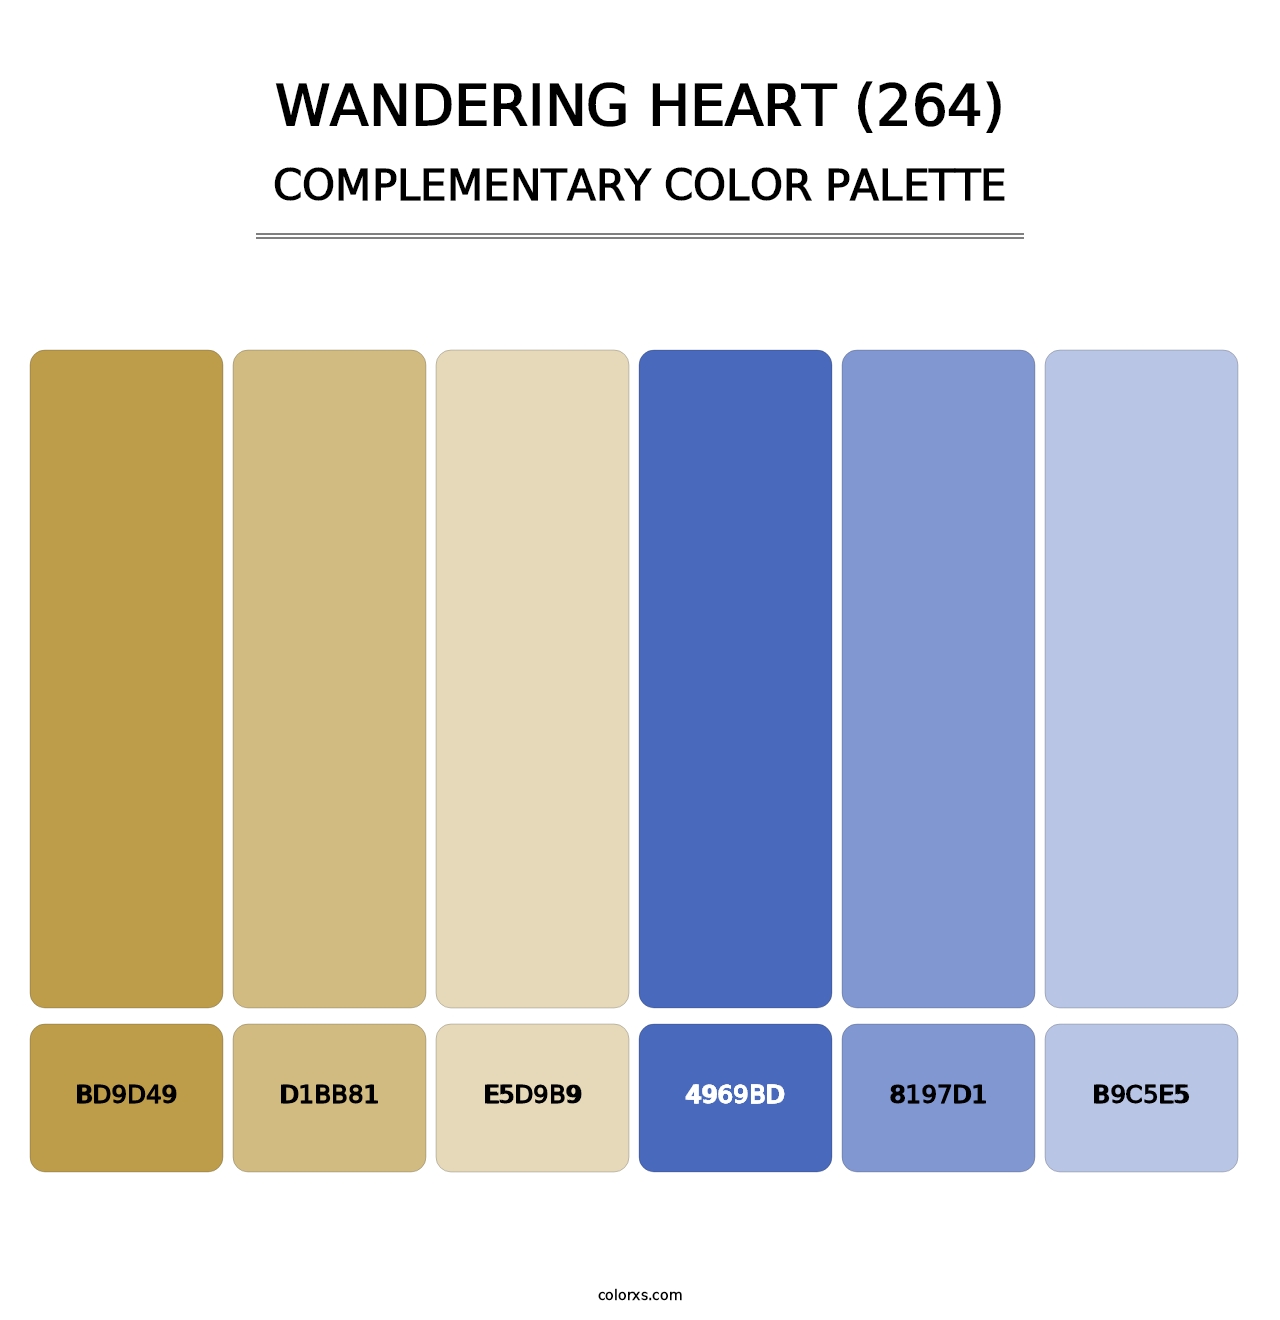 Wandering Heart (264) - Complementary Color Palette